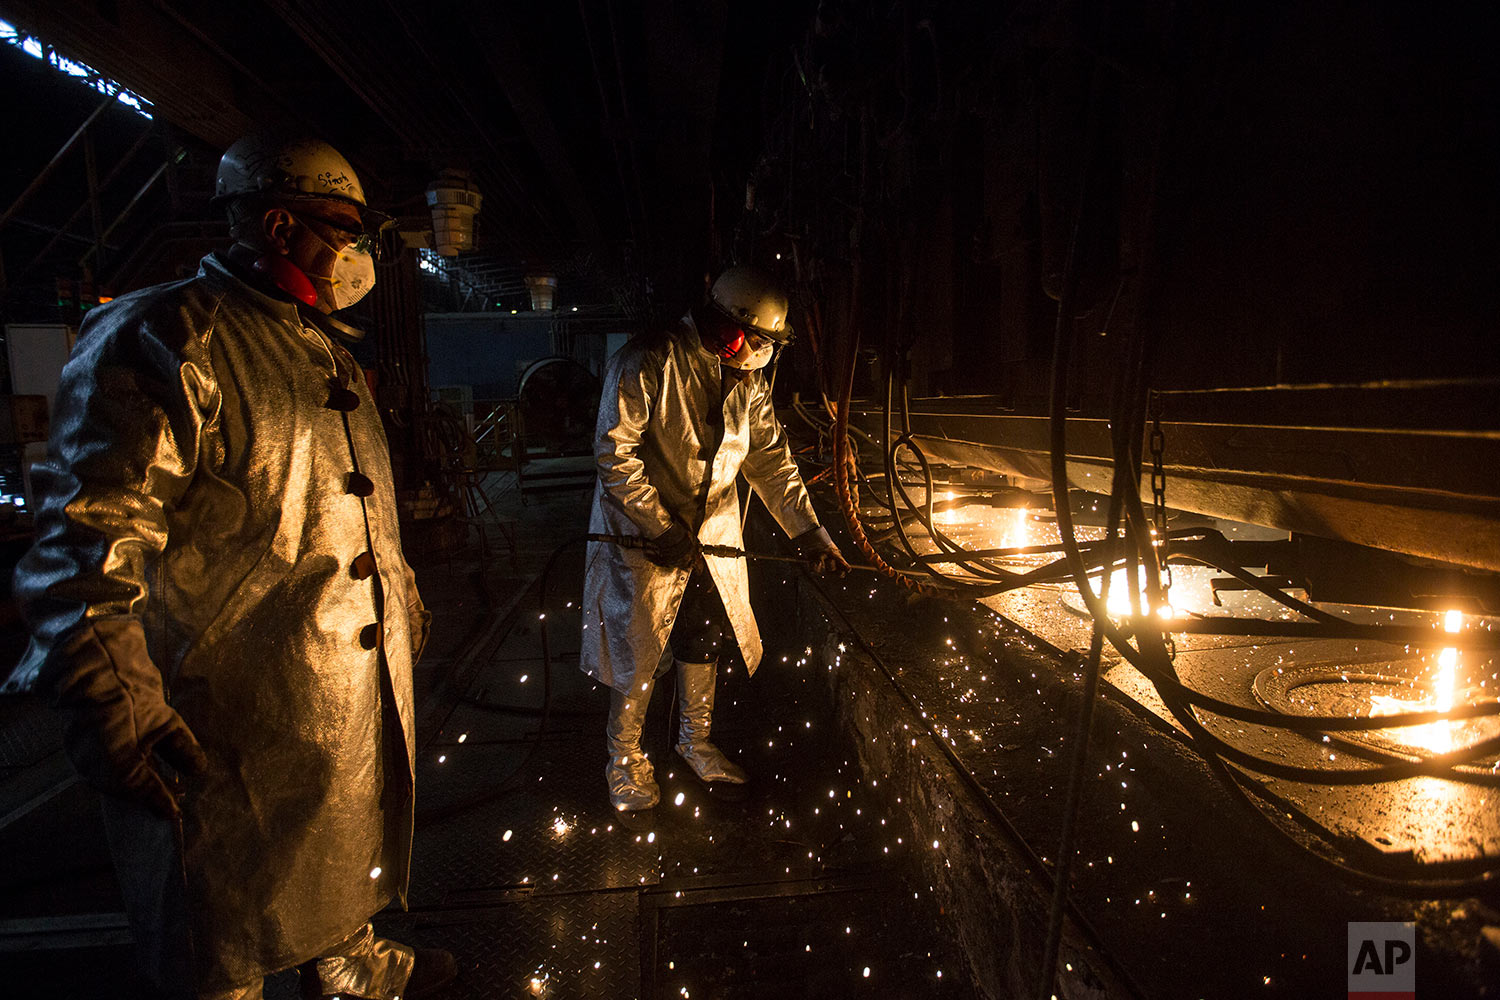  In this Nov. 7, 2017 photo, workers clean the candles, at Sidor's Palanquilla plant, in Ciudad Guayana, Bolivar state, Venezuela. In Sidor, only two of the four smelting ovens that make steel bars are functioning, and workers who used to operate aro